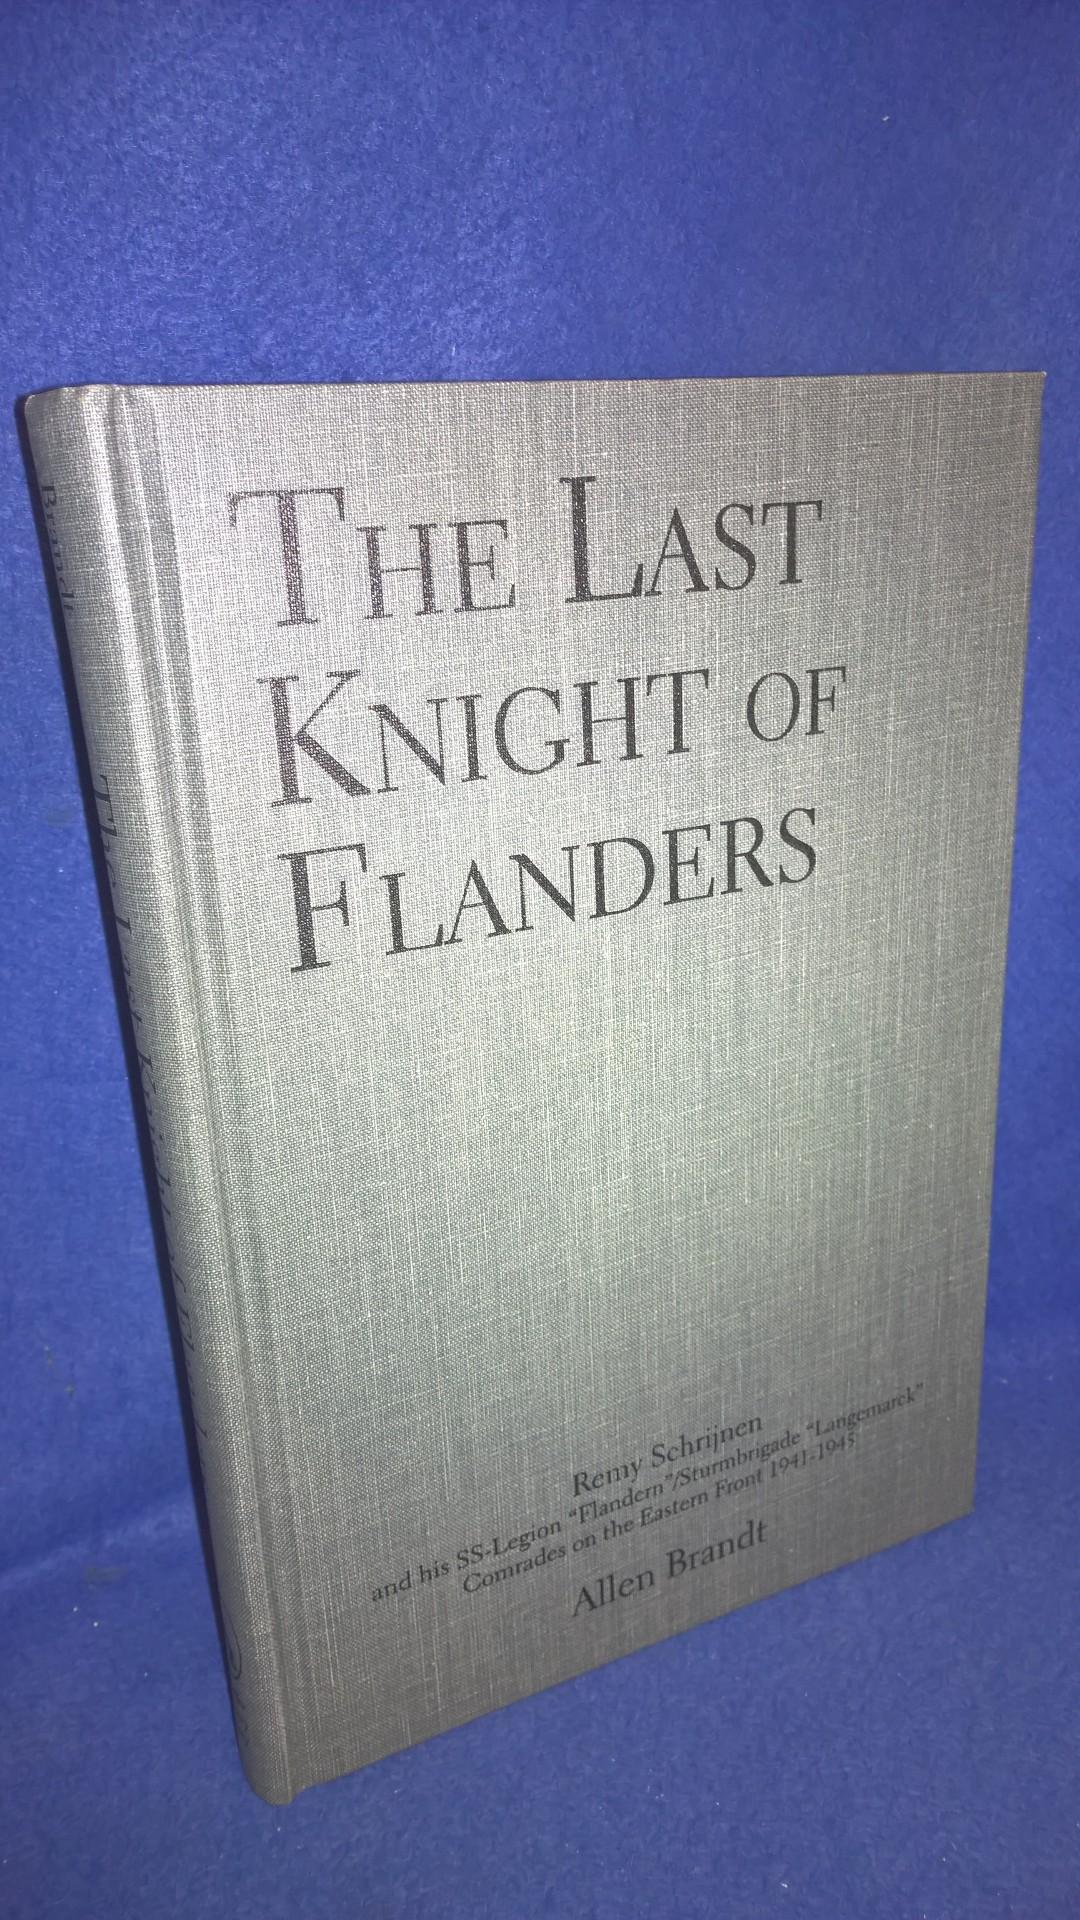 The Last Knight of Flanders: Remy Schrijnen and his SS-Legion “Flandern”/Sturmbrigade “Langemarck” Comrades on the Eastern Front 1941-1945.